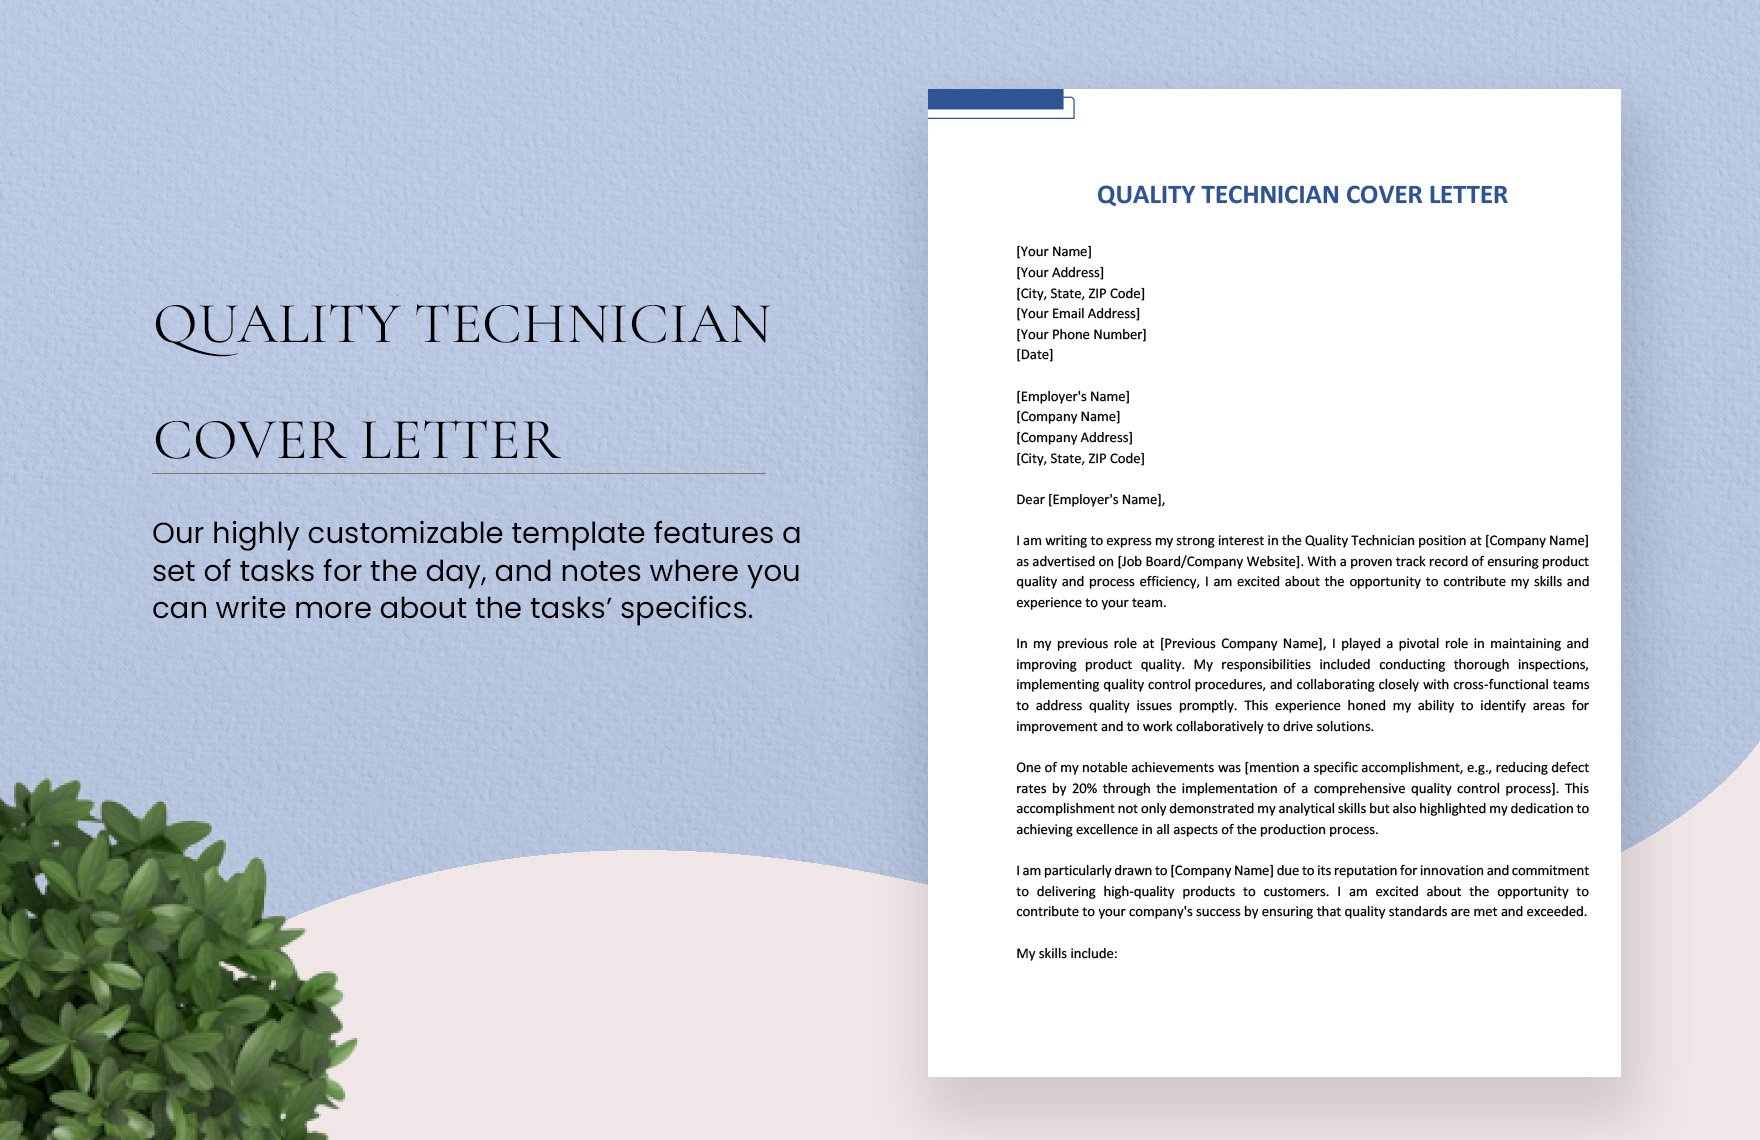 Quality Technician Cover Letter